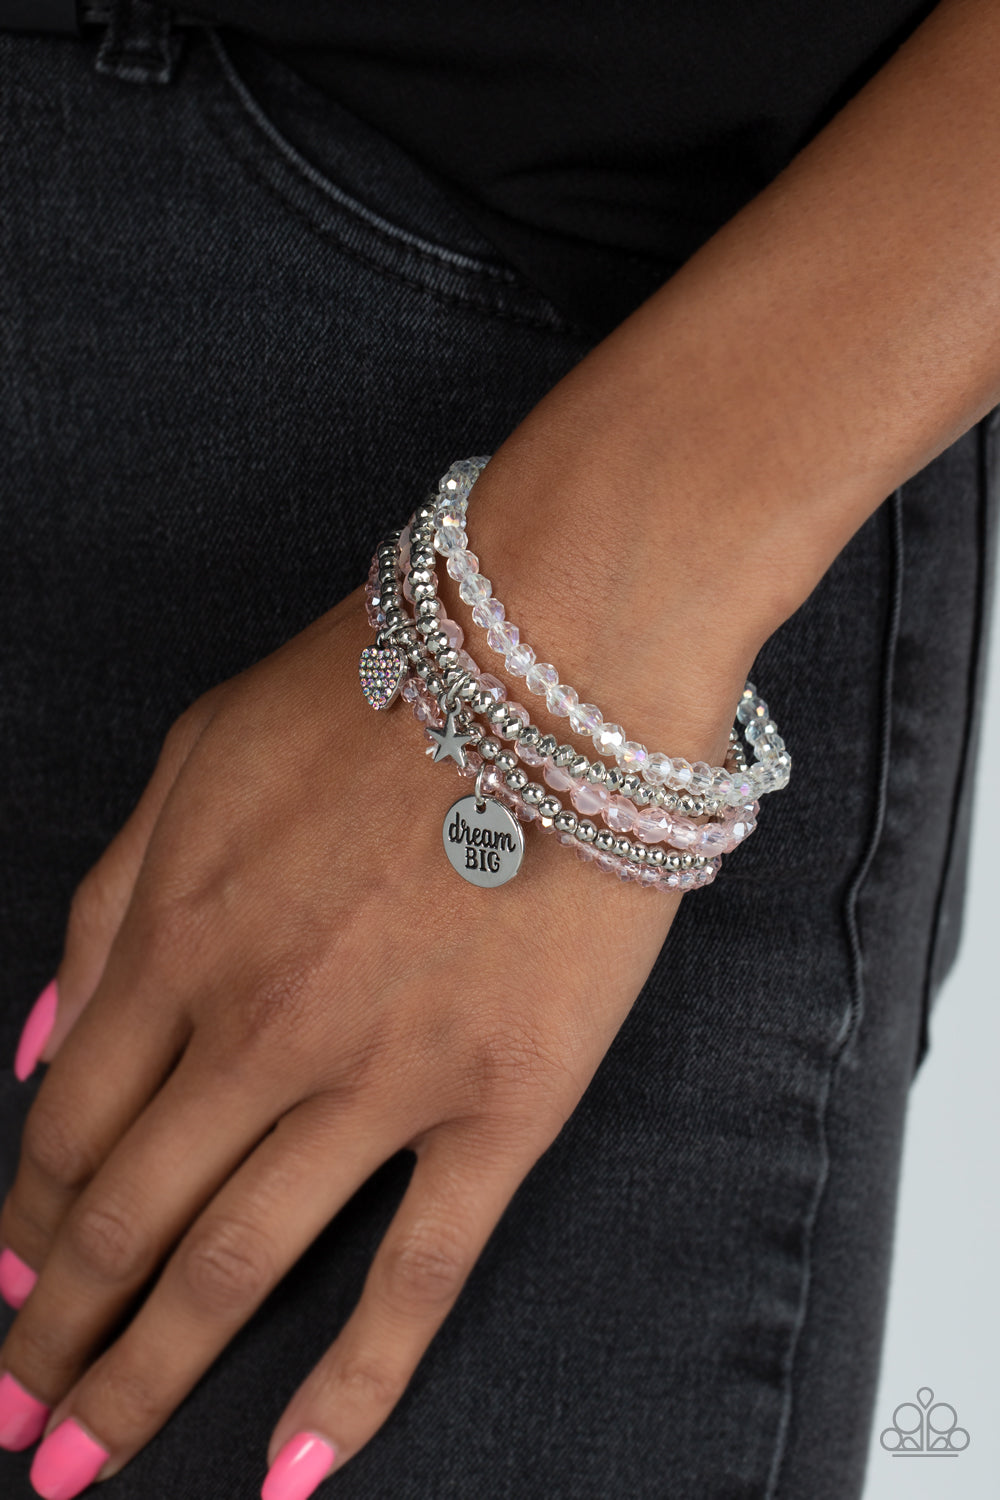 Teenage DREAMER Pink Bracelet - Paparazzi Accessories   Pink, silver, white, and smooth silver beads wrap around stretchy bands, and combine into a colorful stack along the wrist. The reflective, pink-beaded bracelet features a silver pendant with the phrase "dream BIG" stamped on it, while a silver-beaded bracelet features a silver star charm. Hanging from smooth, silver beads, a heart charm embossed with iridescent rhinestones adds a shimmery detail to the stack, resulting in a youthful, dreamy design.